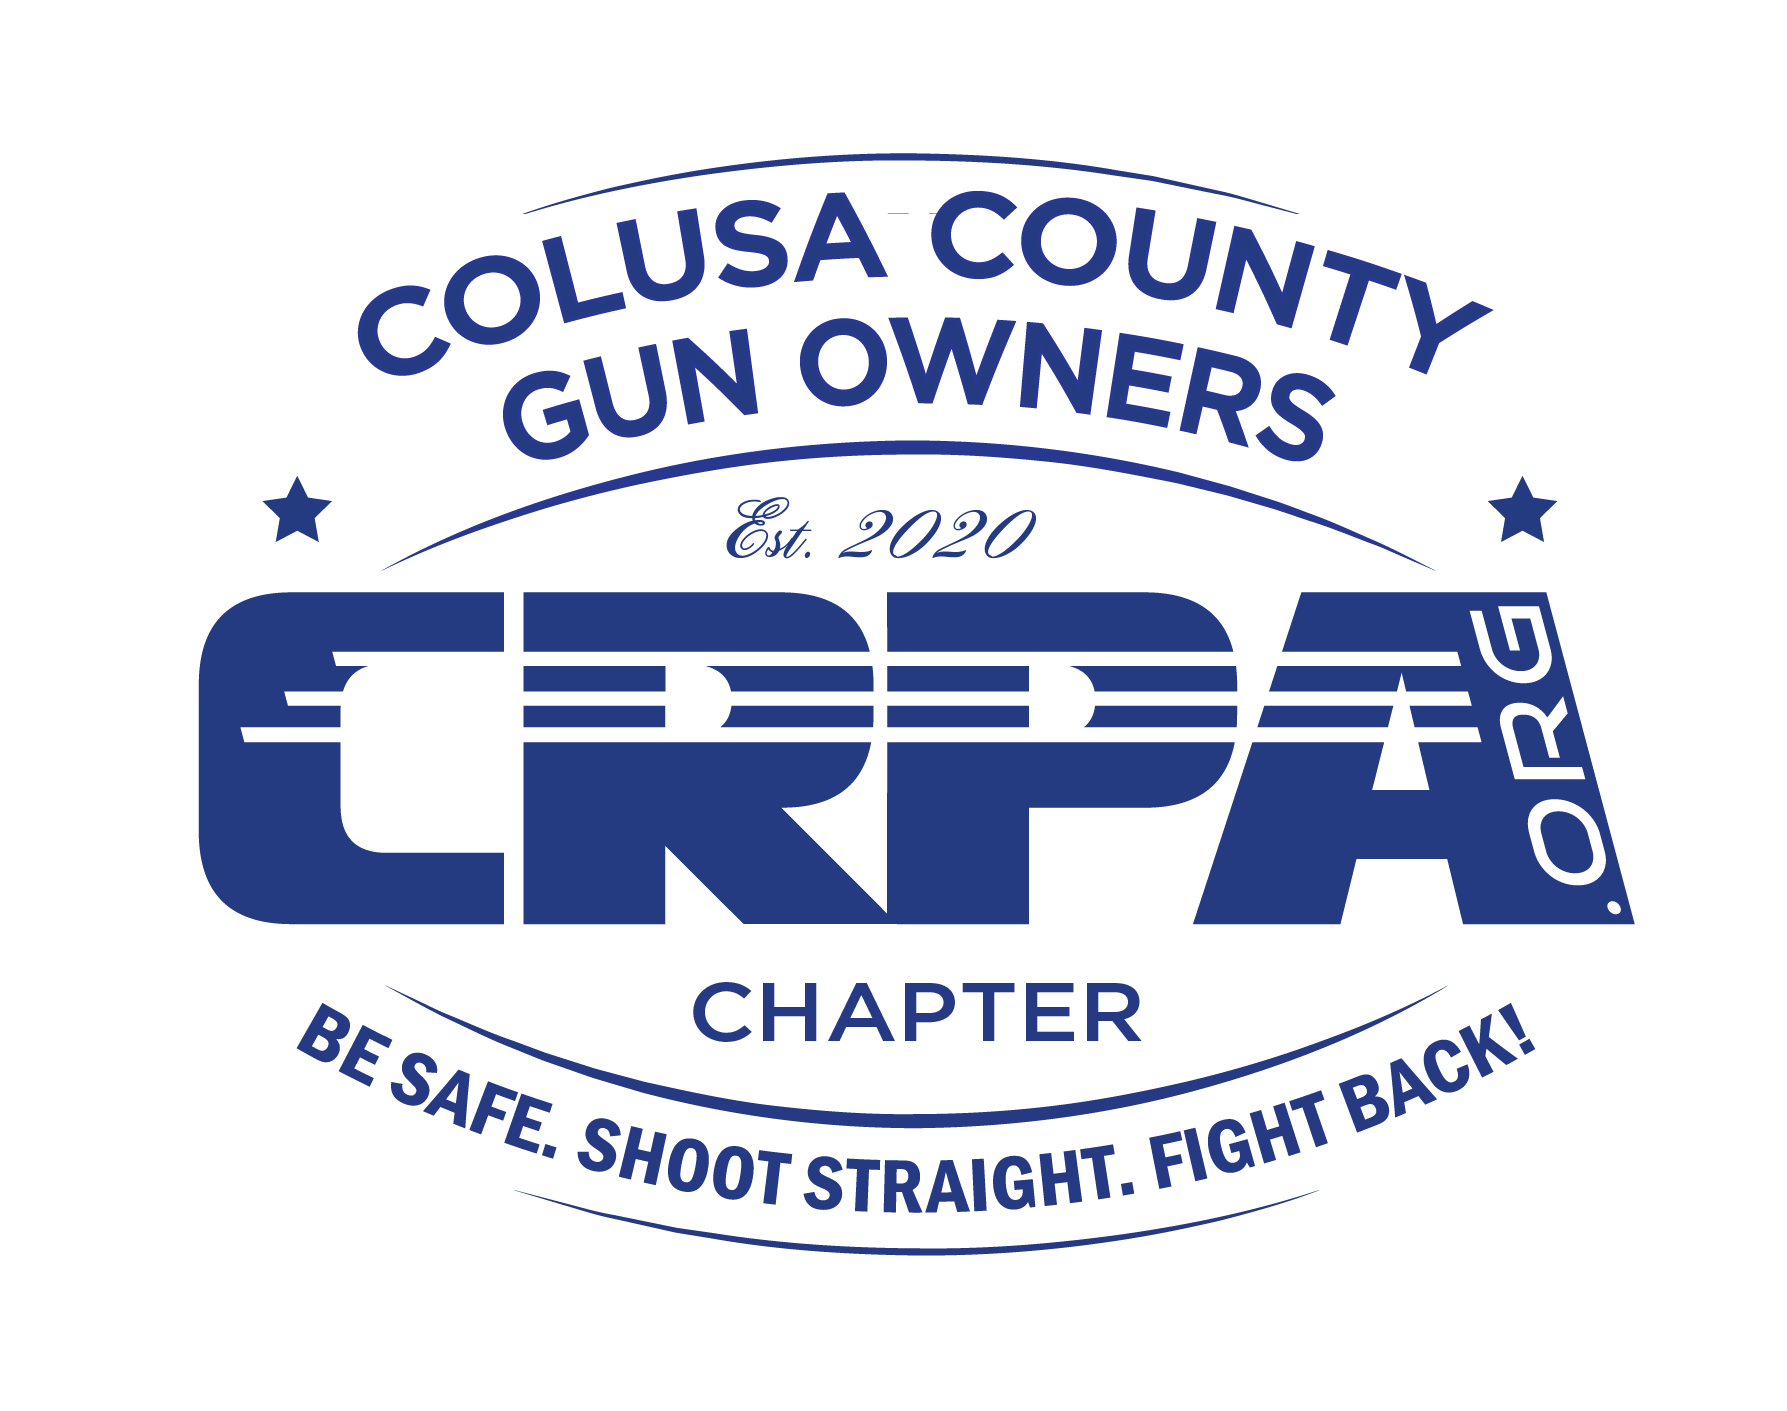 Colusa County Gun Owners: A CRPA Chapter